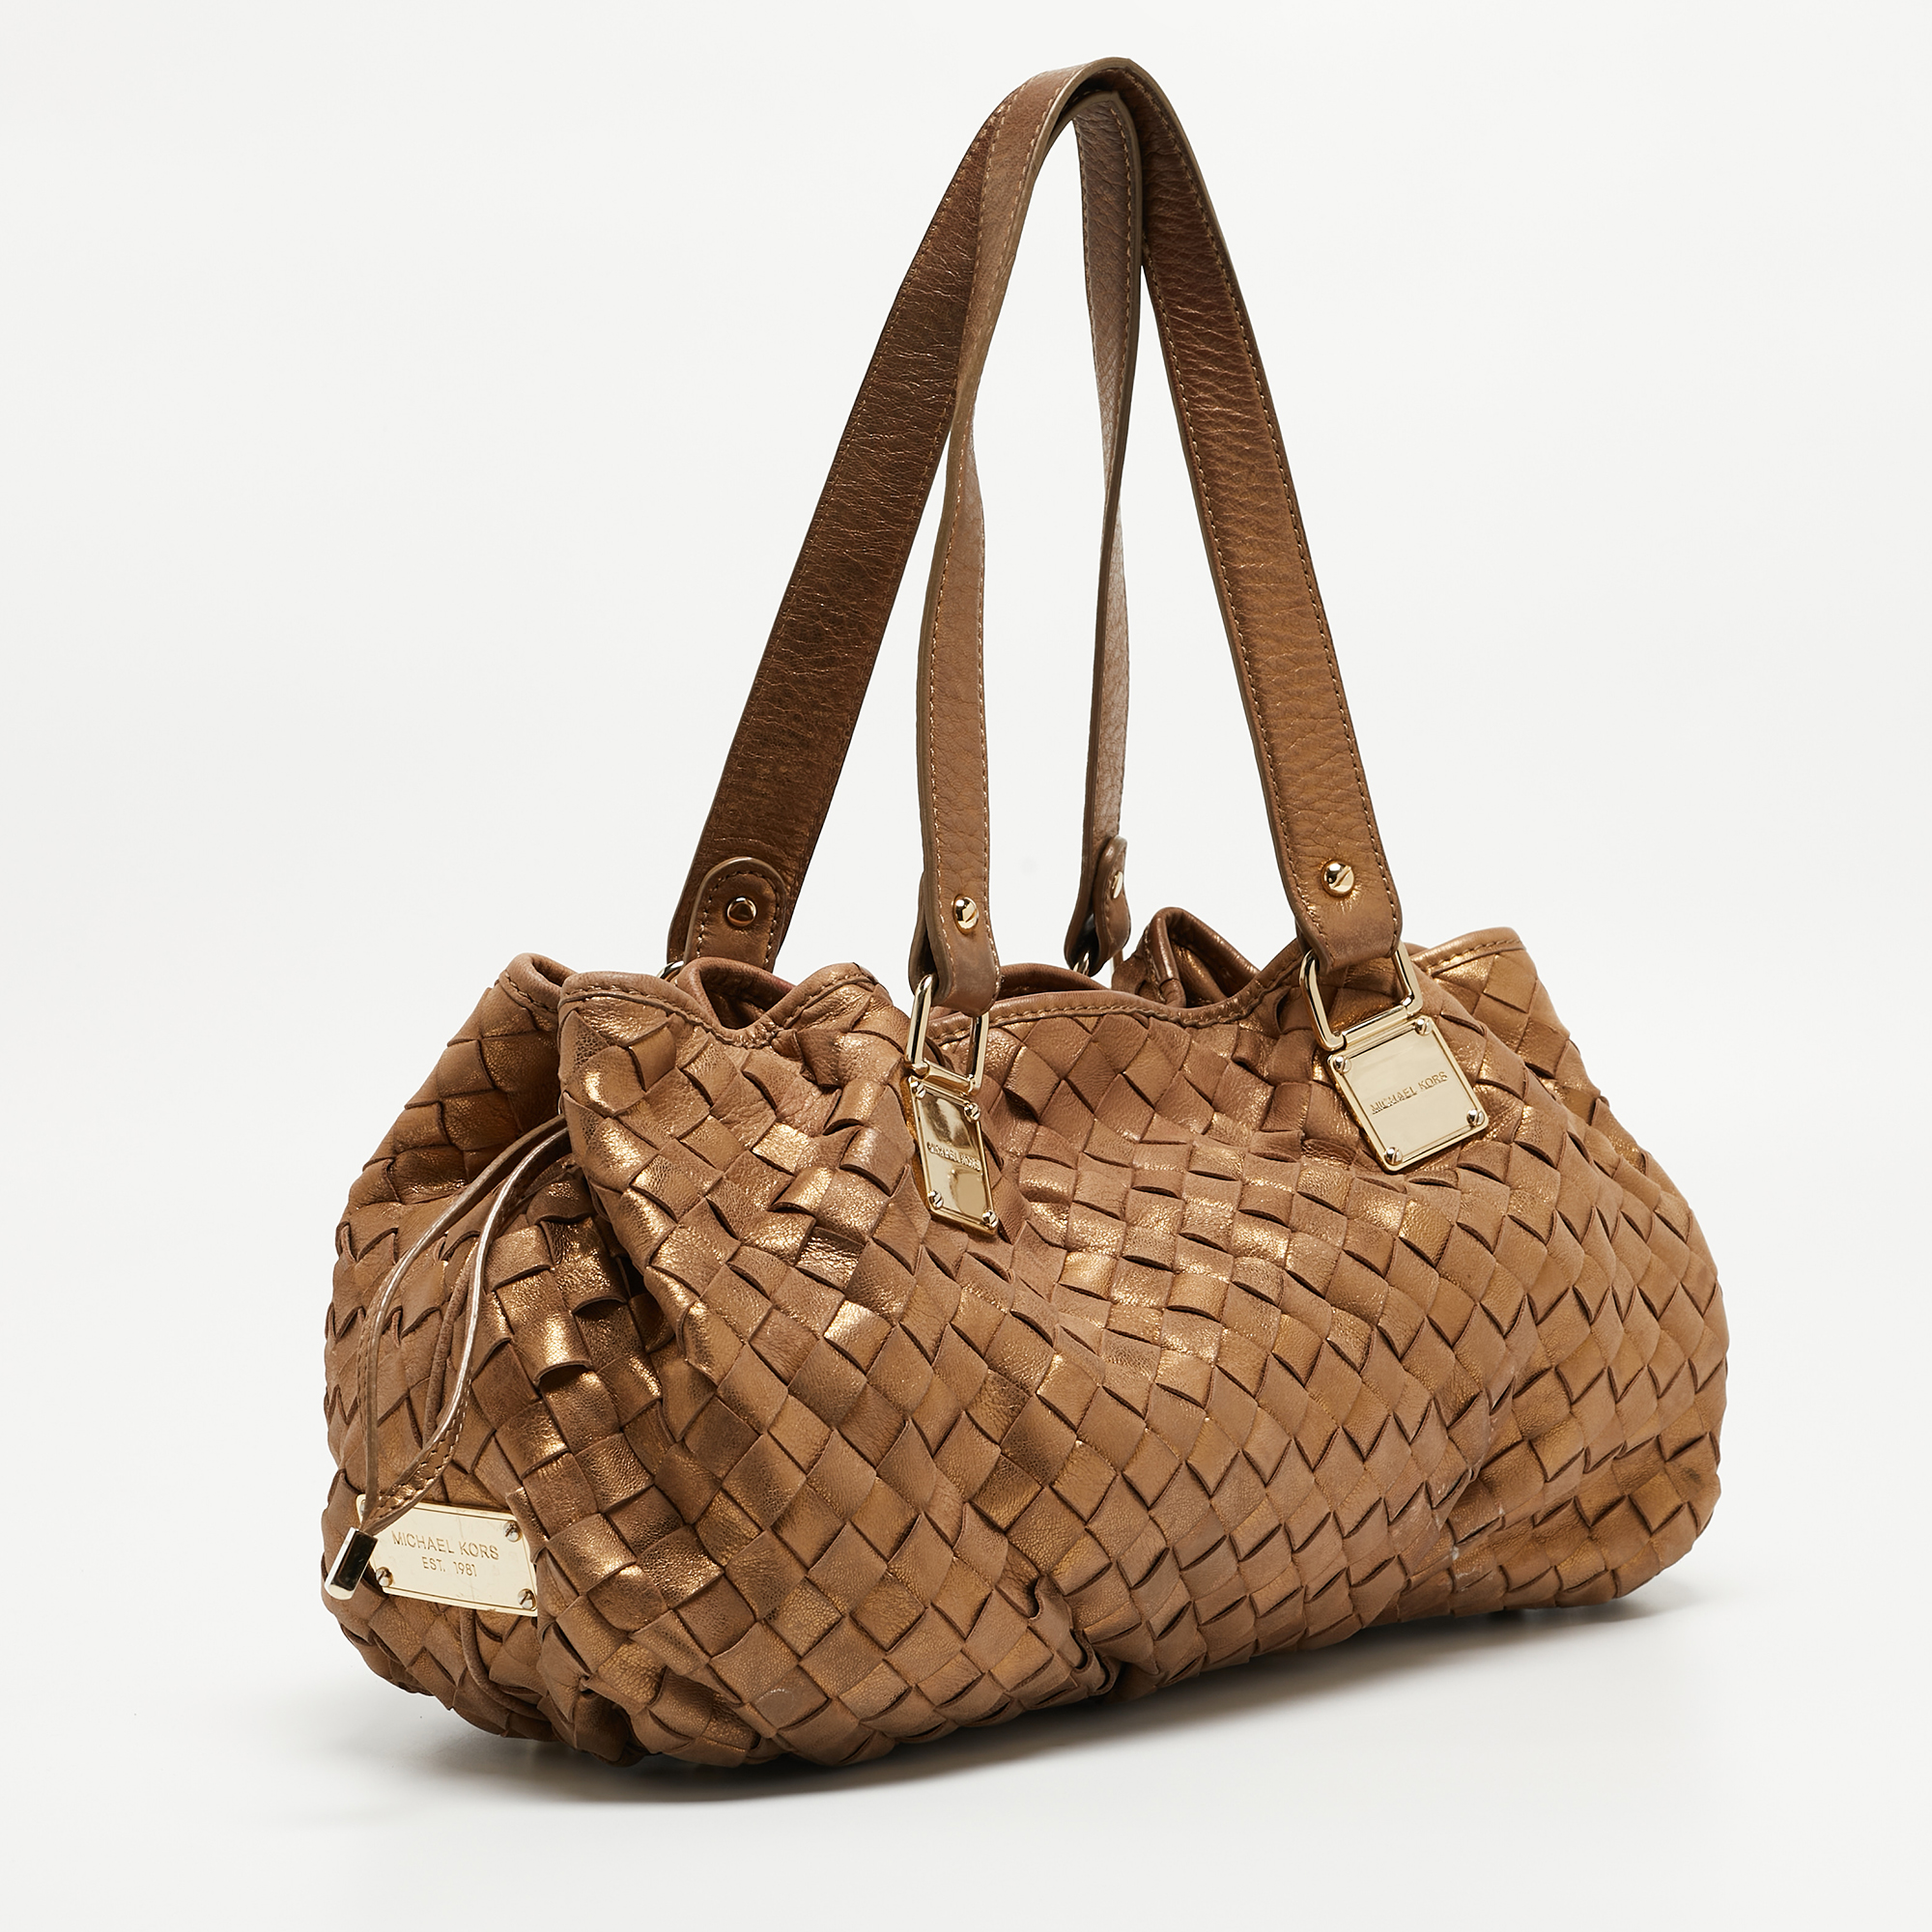 Michael Kors Gold Woven Leather Drawstring Tote